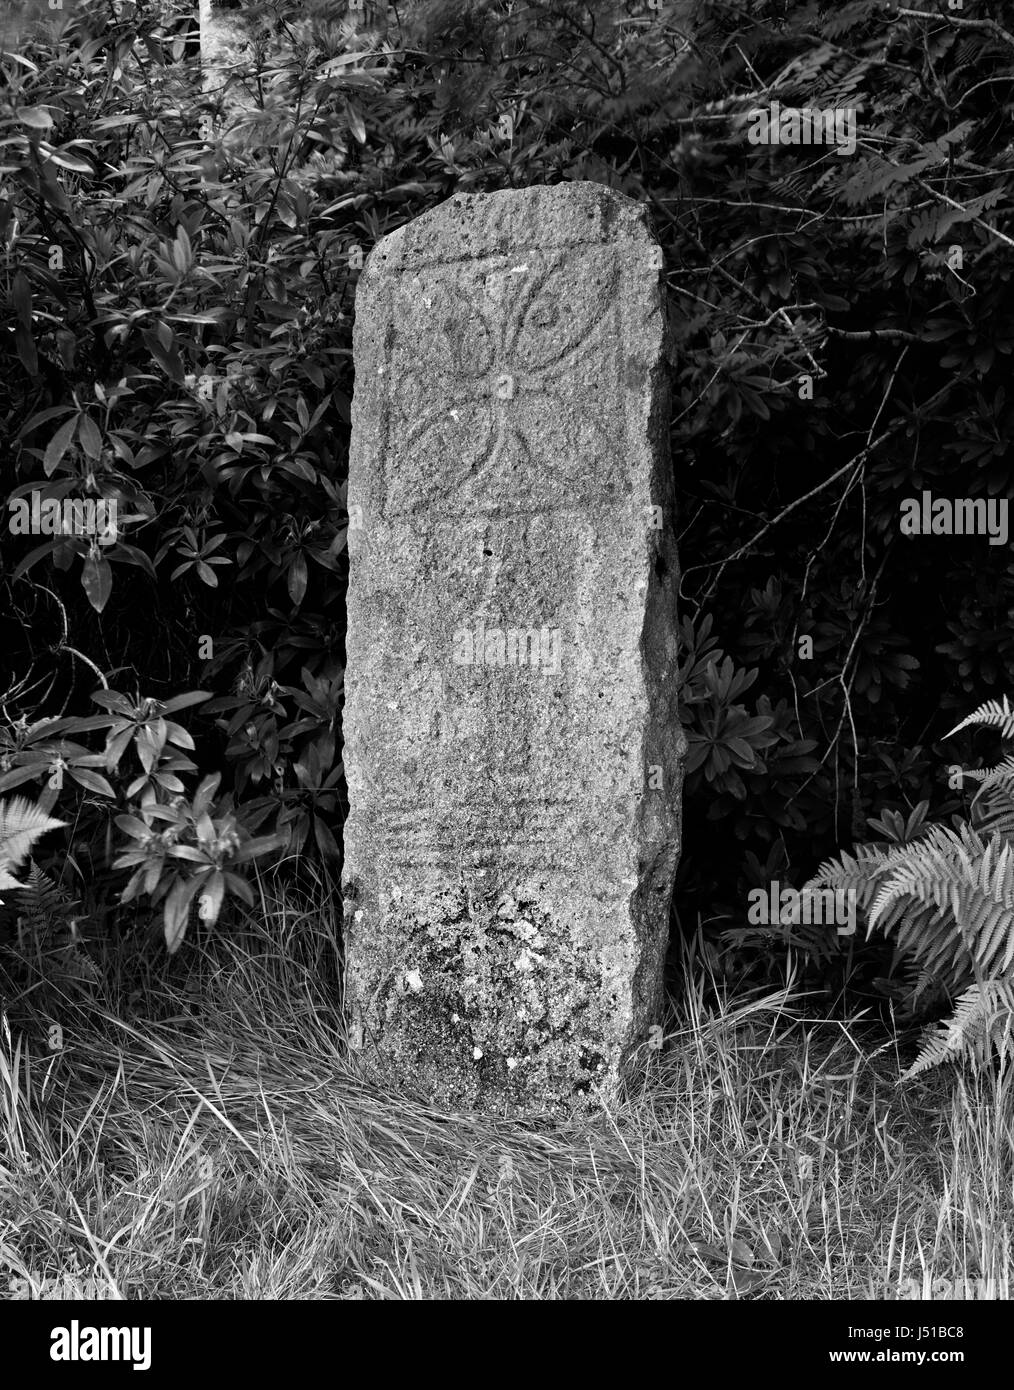 A Pictish symbol stone on Isle of Raasay, off Skye, Scotland, with pagan & Christian symbols including a flabellum (ritual fan) with equal arm cross. Stock Photo